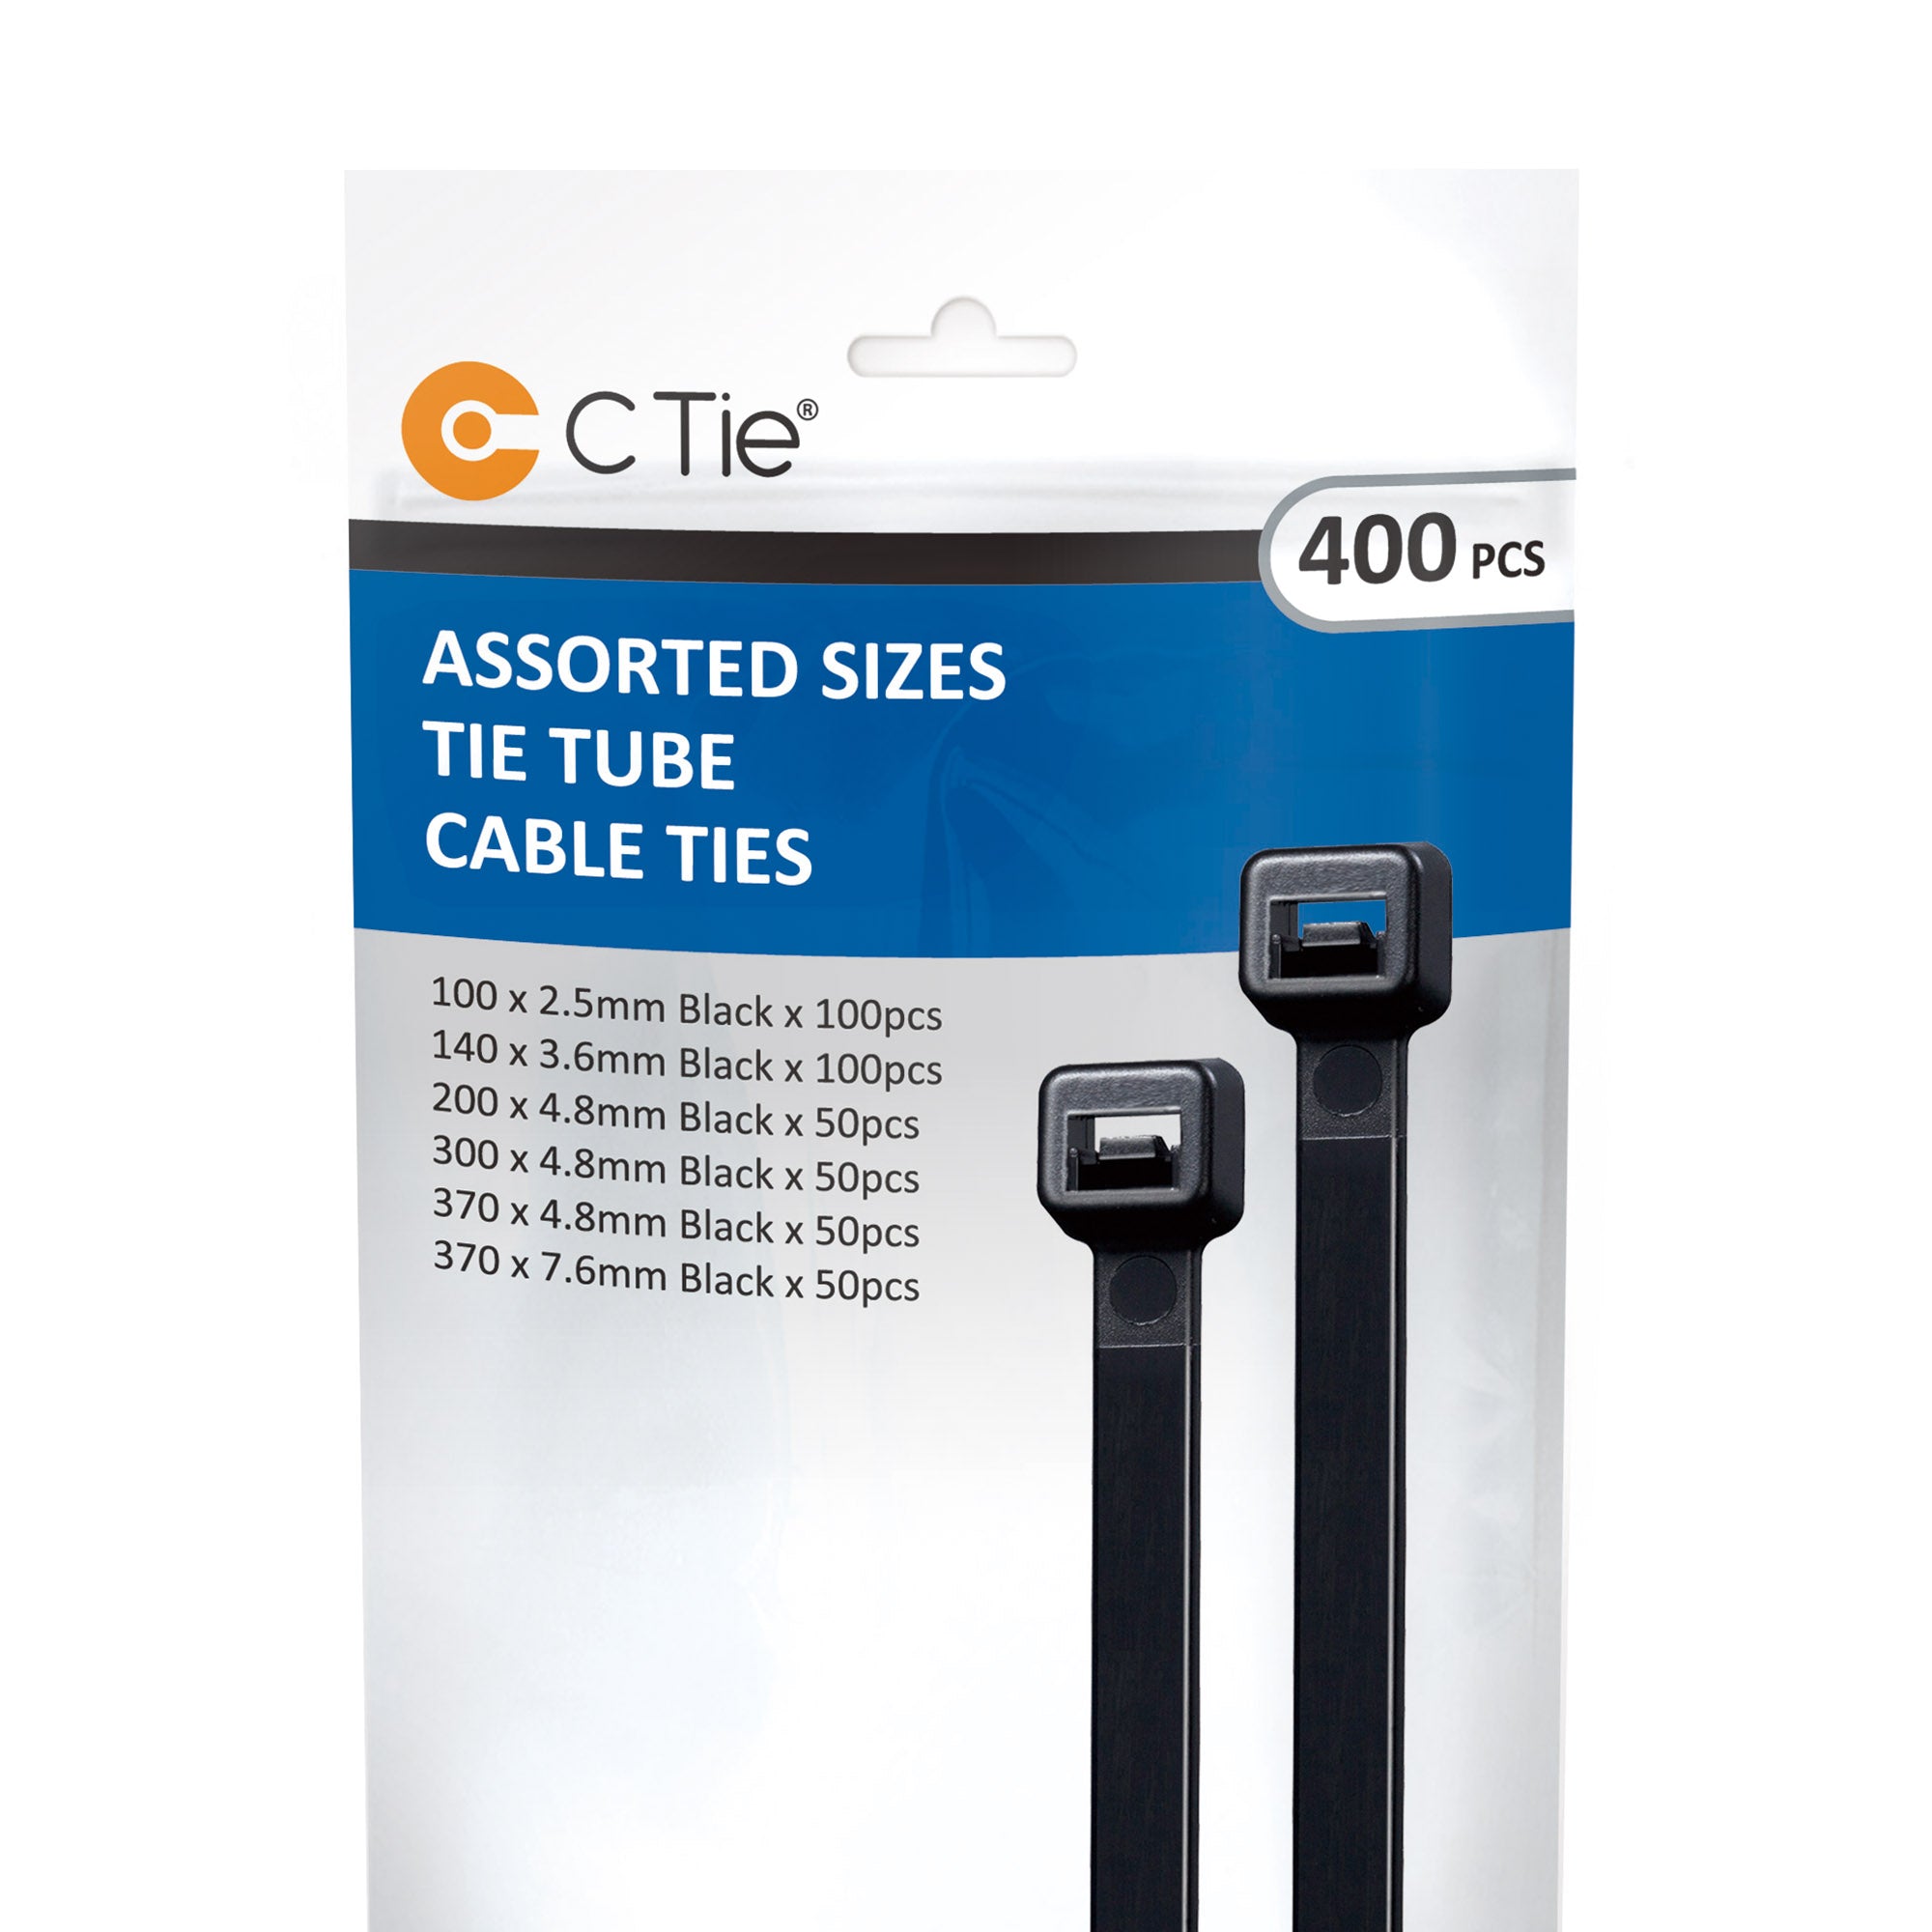 Black Assorted Cable Ties - 400pcs - Assorted Sizes